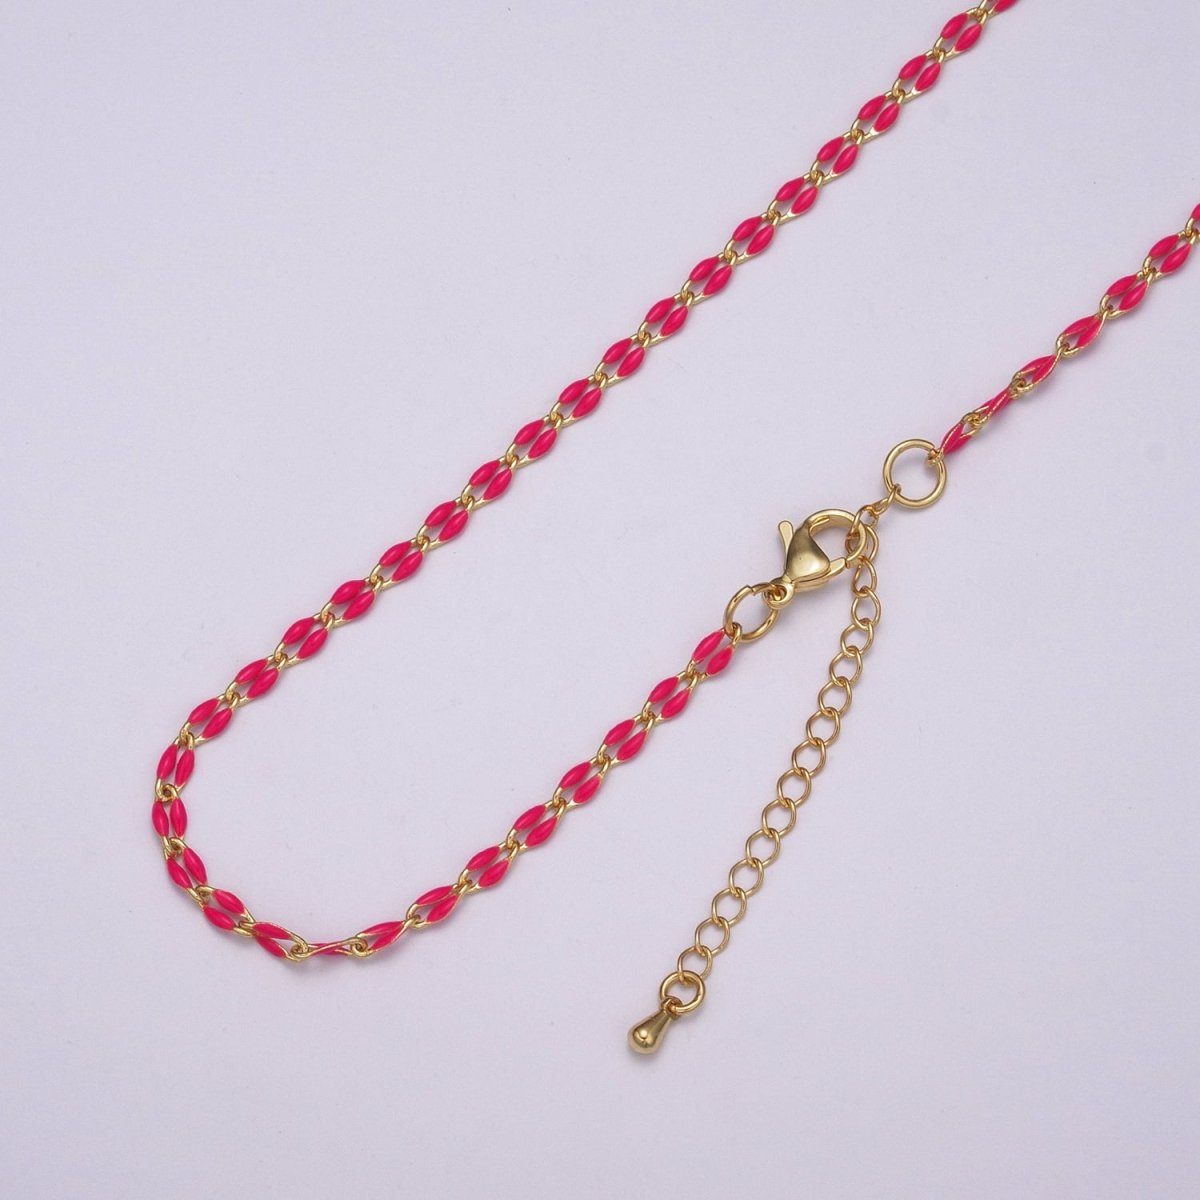 Enamel Gold Filled Colored Chain 2.9mm width Colorful Chain, Chunky Statement Chain Link chain 16, 18 inch + 2 inch extender | WA-337 to WA-358 Clearance Pricing - DLUXCA